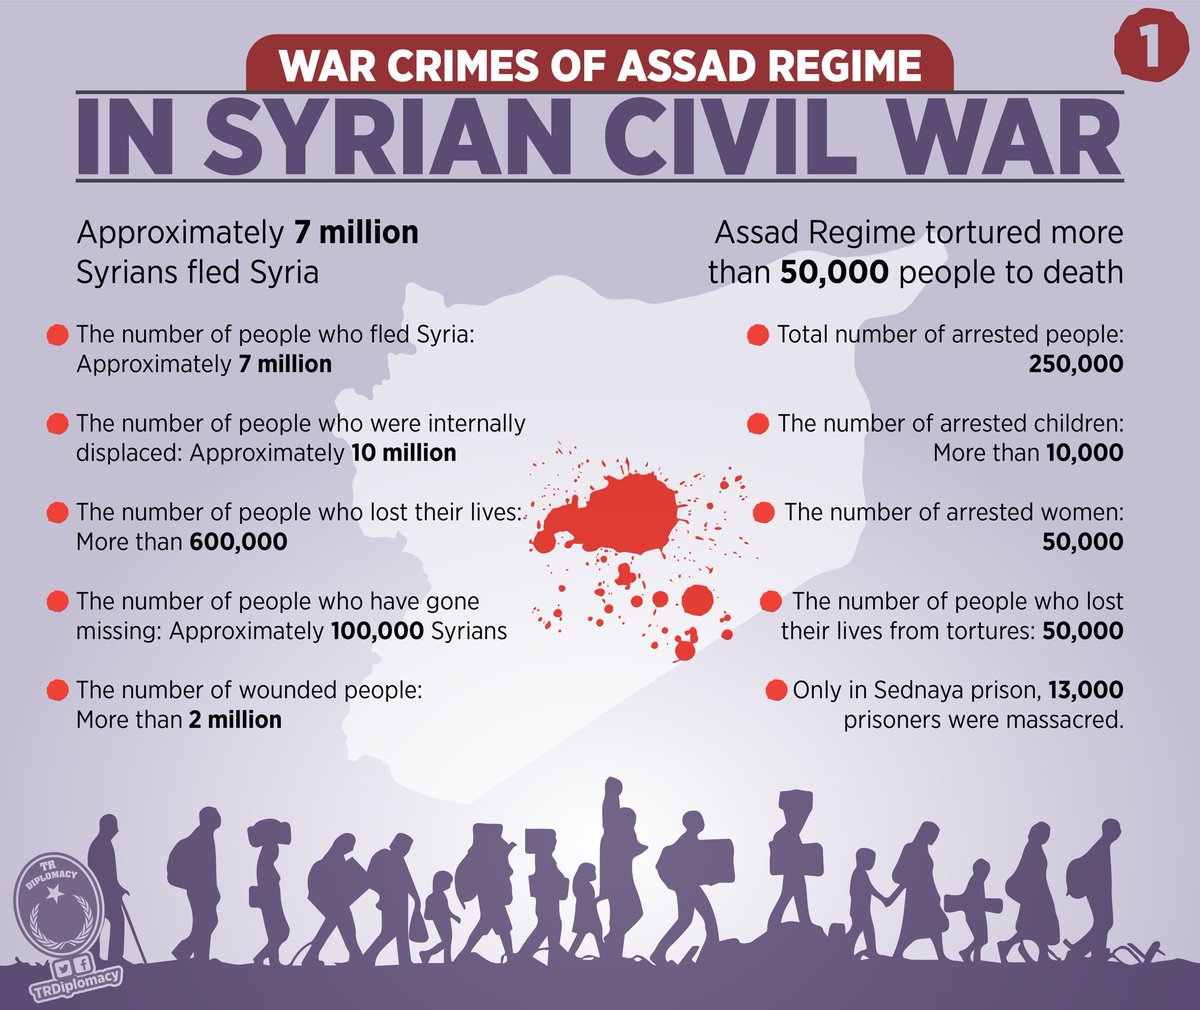 The war crimes committed by Assad Regime, massacring thousands with chemical bombs in Idlib, during the Syrian Civil War